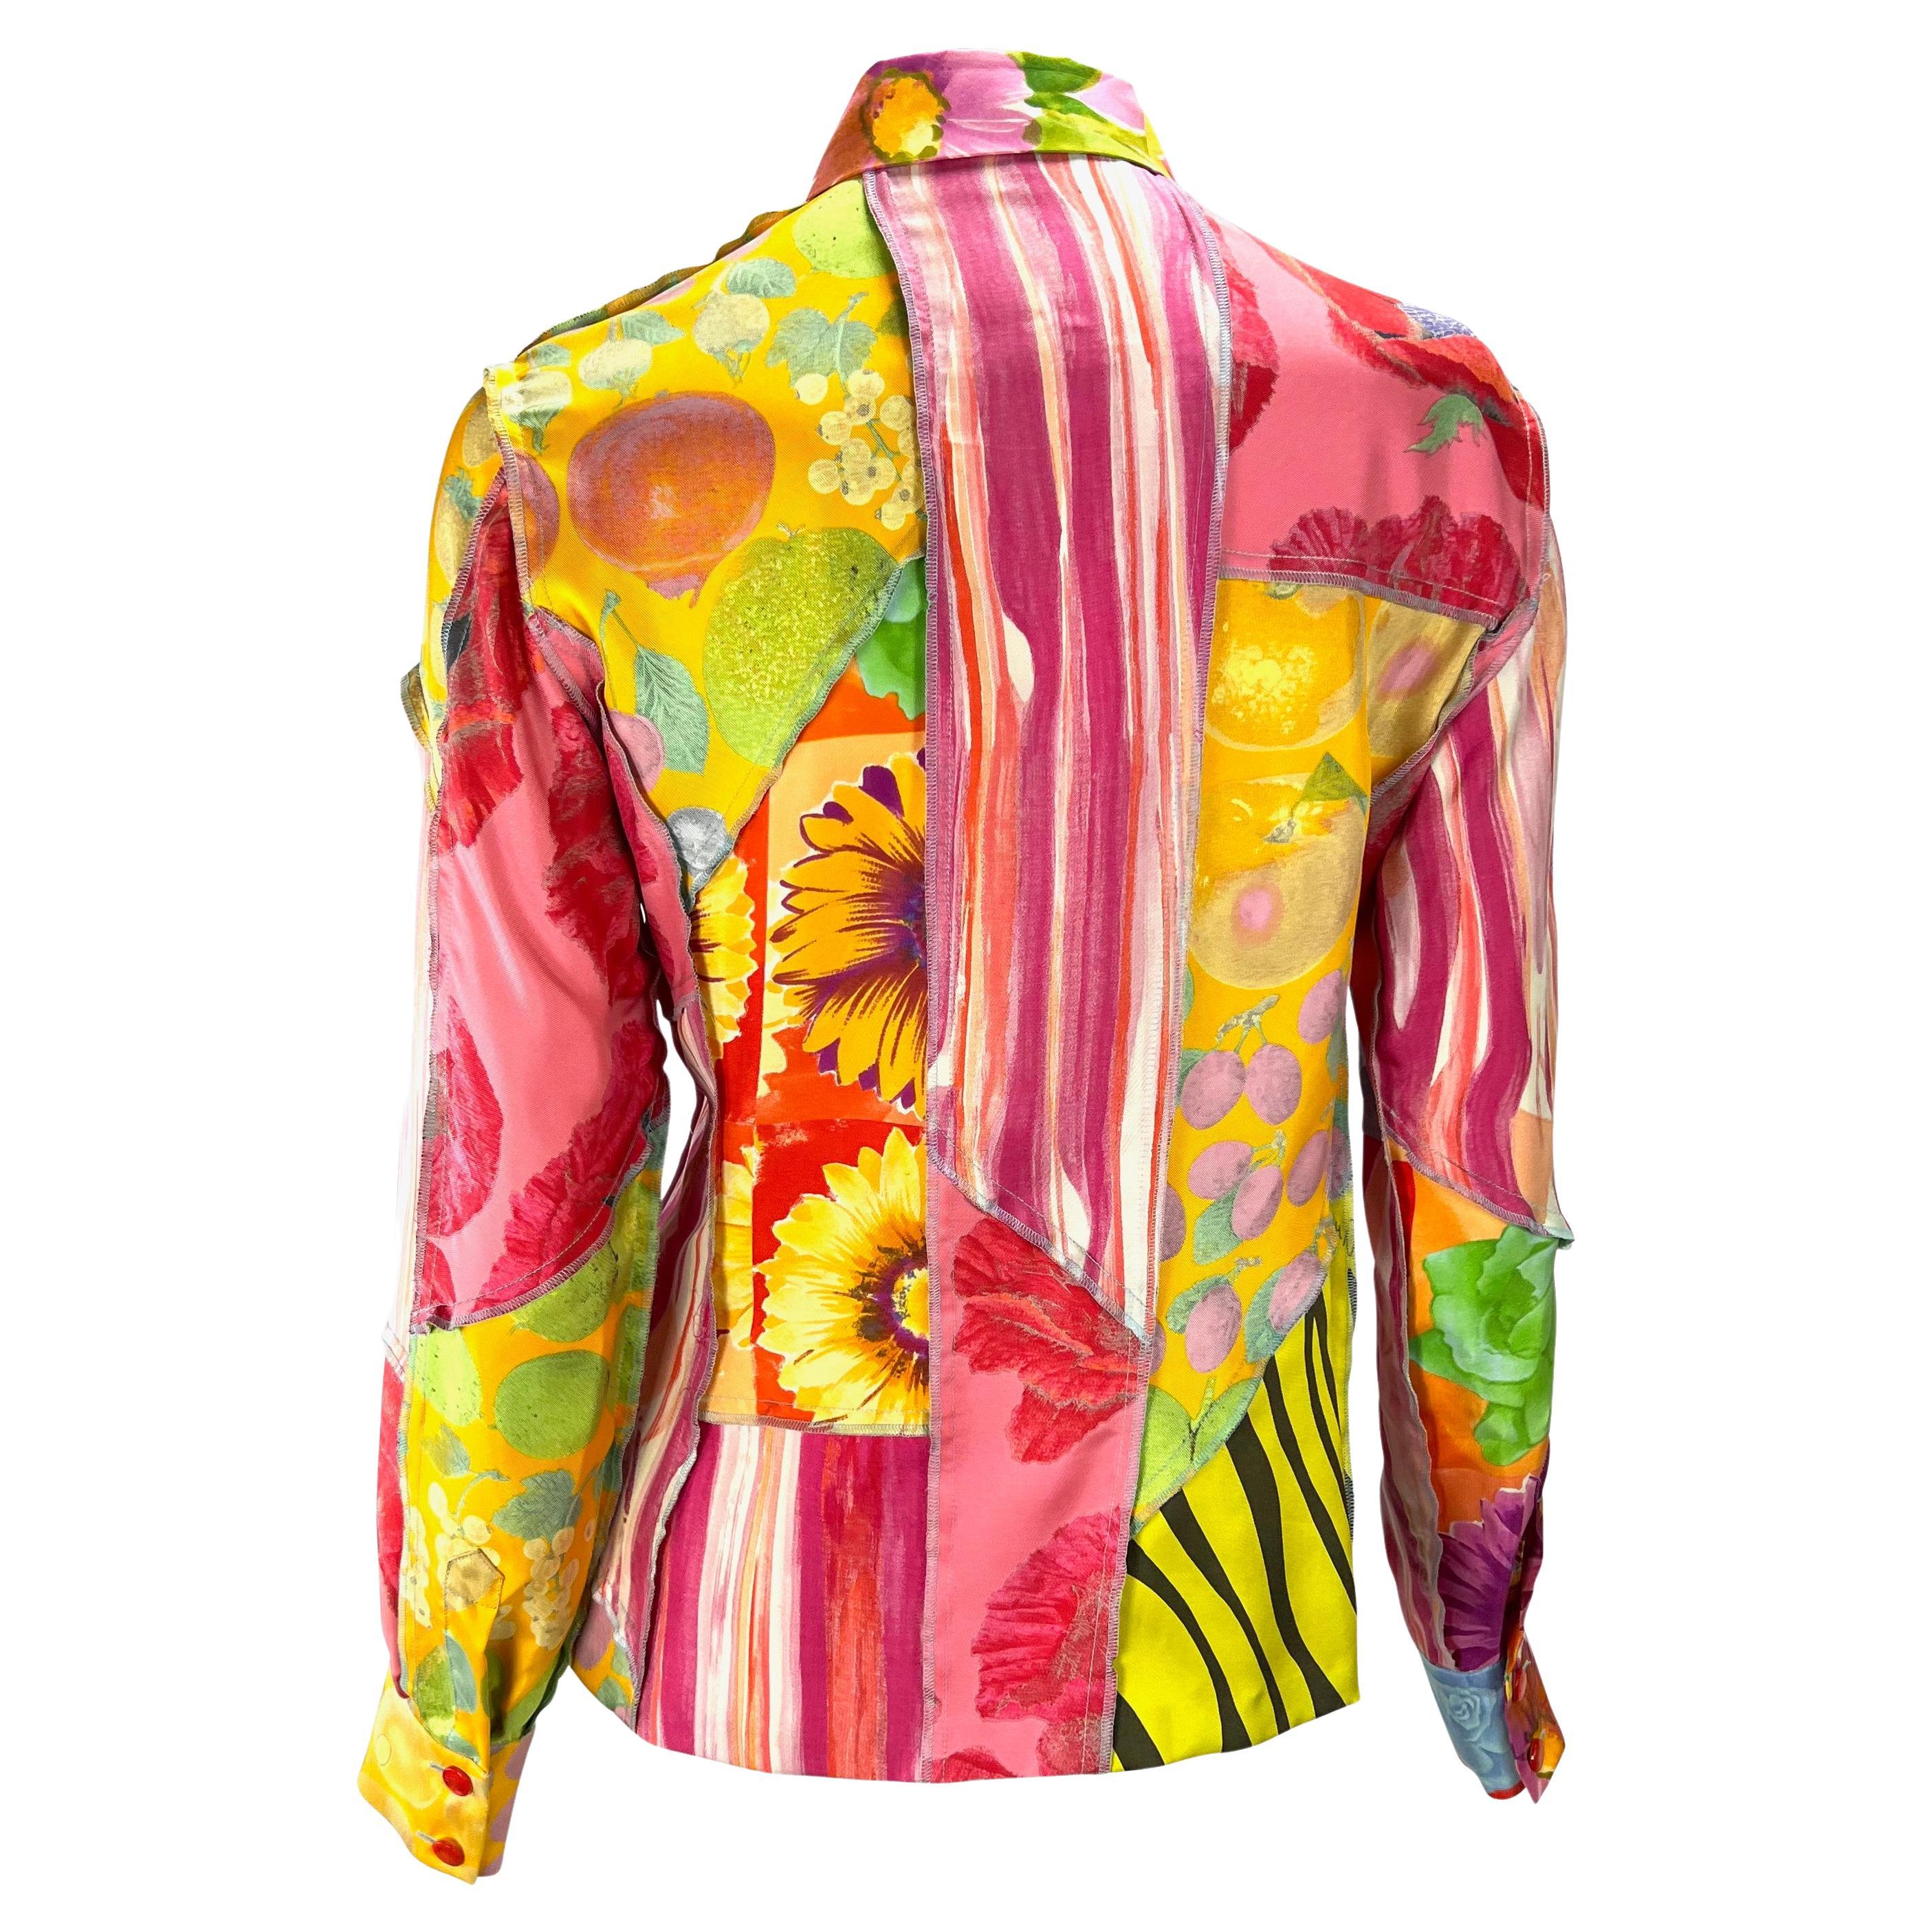 S/S 1996 Gucci by Tom Ford Silk Patchwork Inside Out Print Button Up Blouse For Sale 1